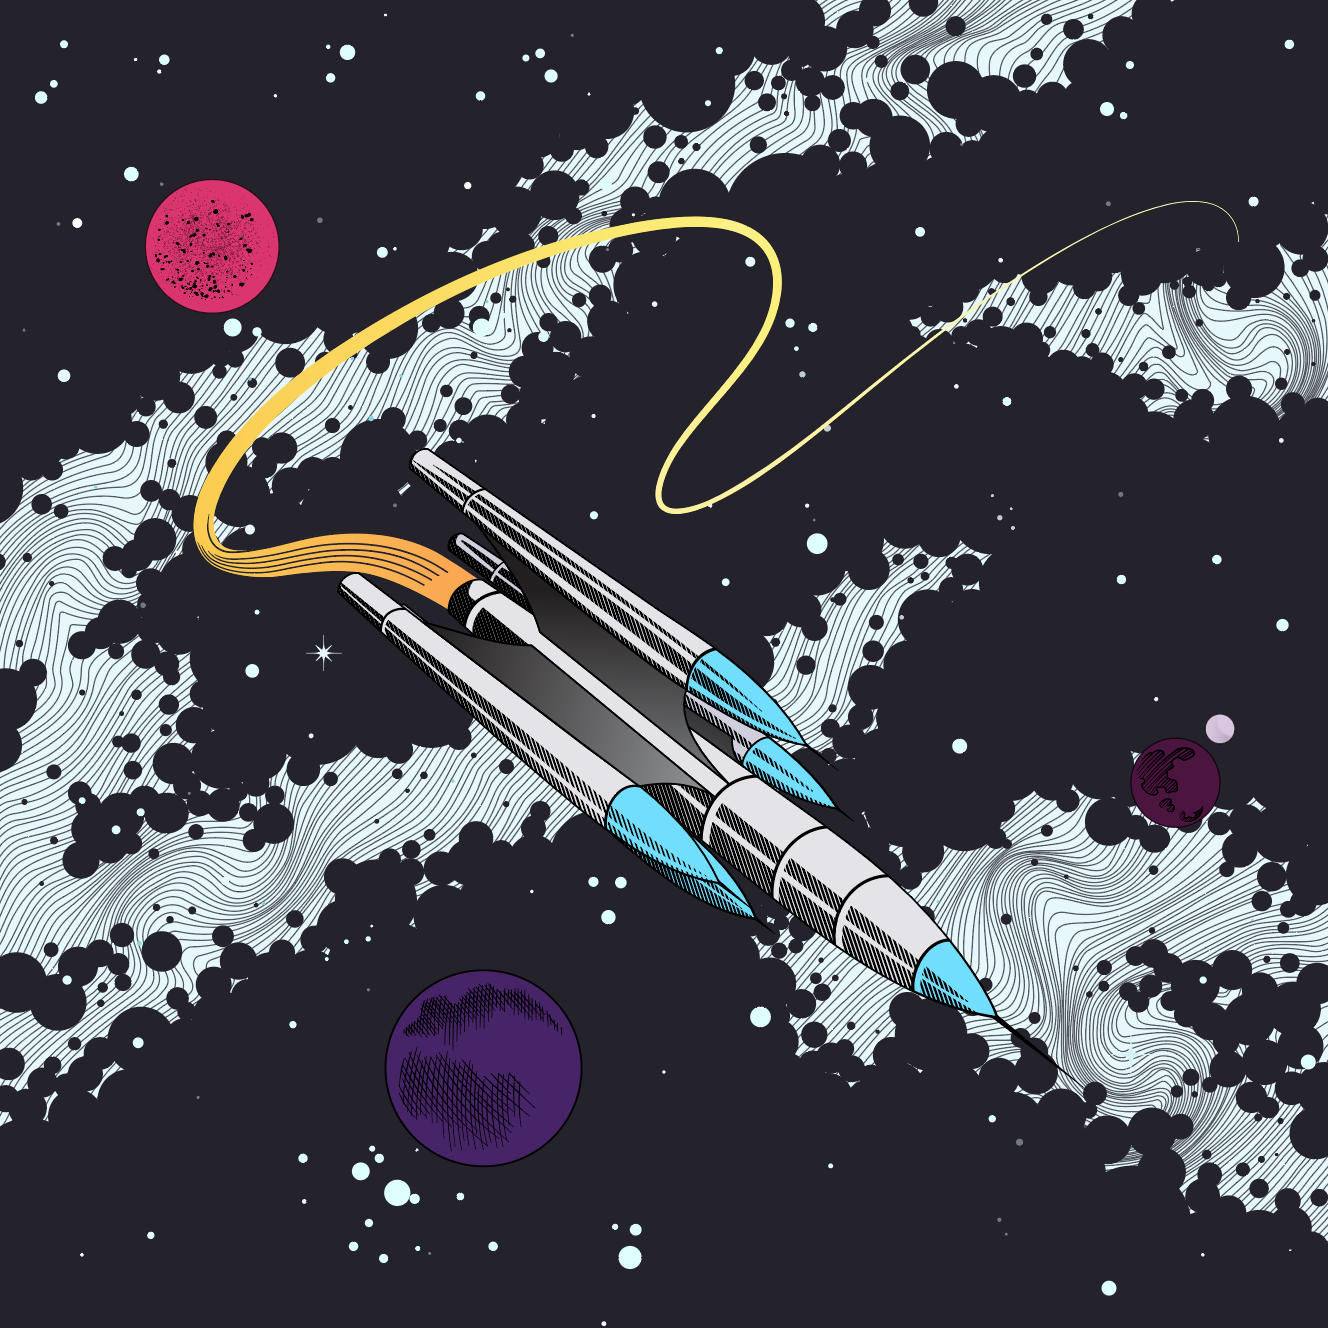 Digital illustration of a spaceship in space